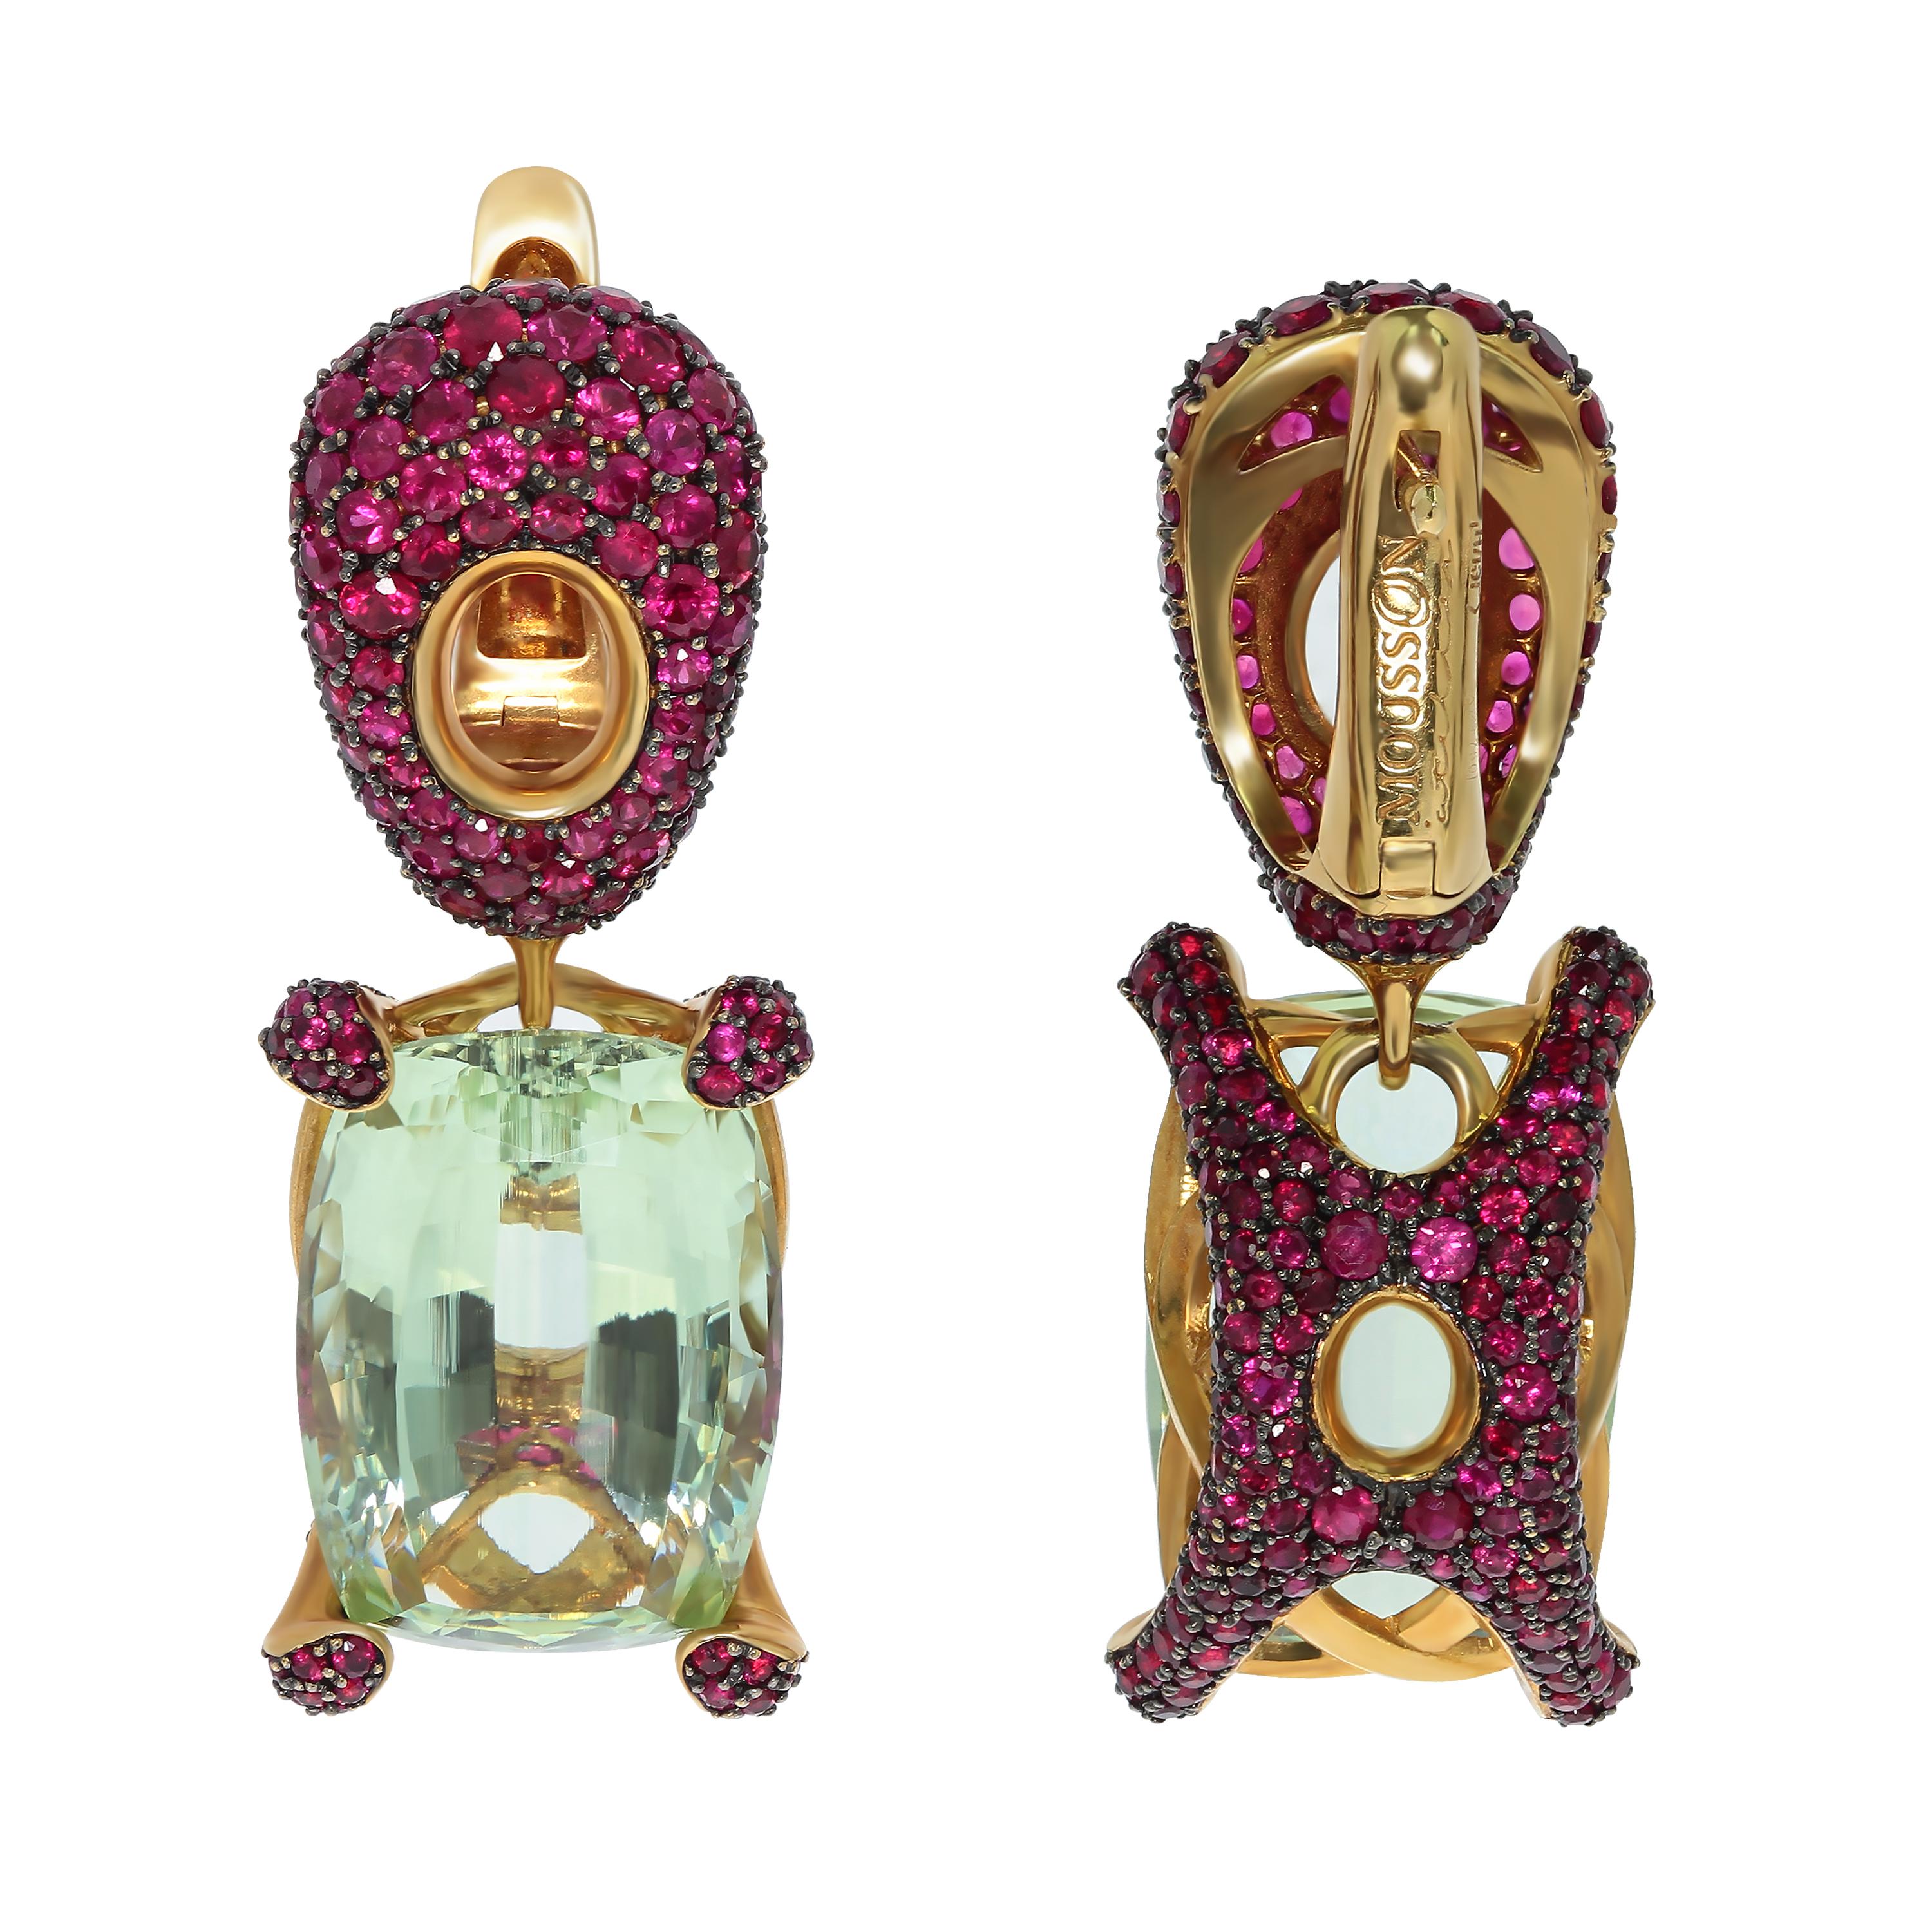 Green Beryl 18.64 Carat Ruby 18 Karat Yellow Gold Earrings
Highlighting an two 18.64 Carat Beryls and 470 Rubies weighing 5.51 Carats are mounted on an 18 Karat Gold lined with black rhodium. It displays a riveting interplay of contrast surfaces